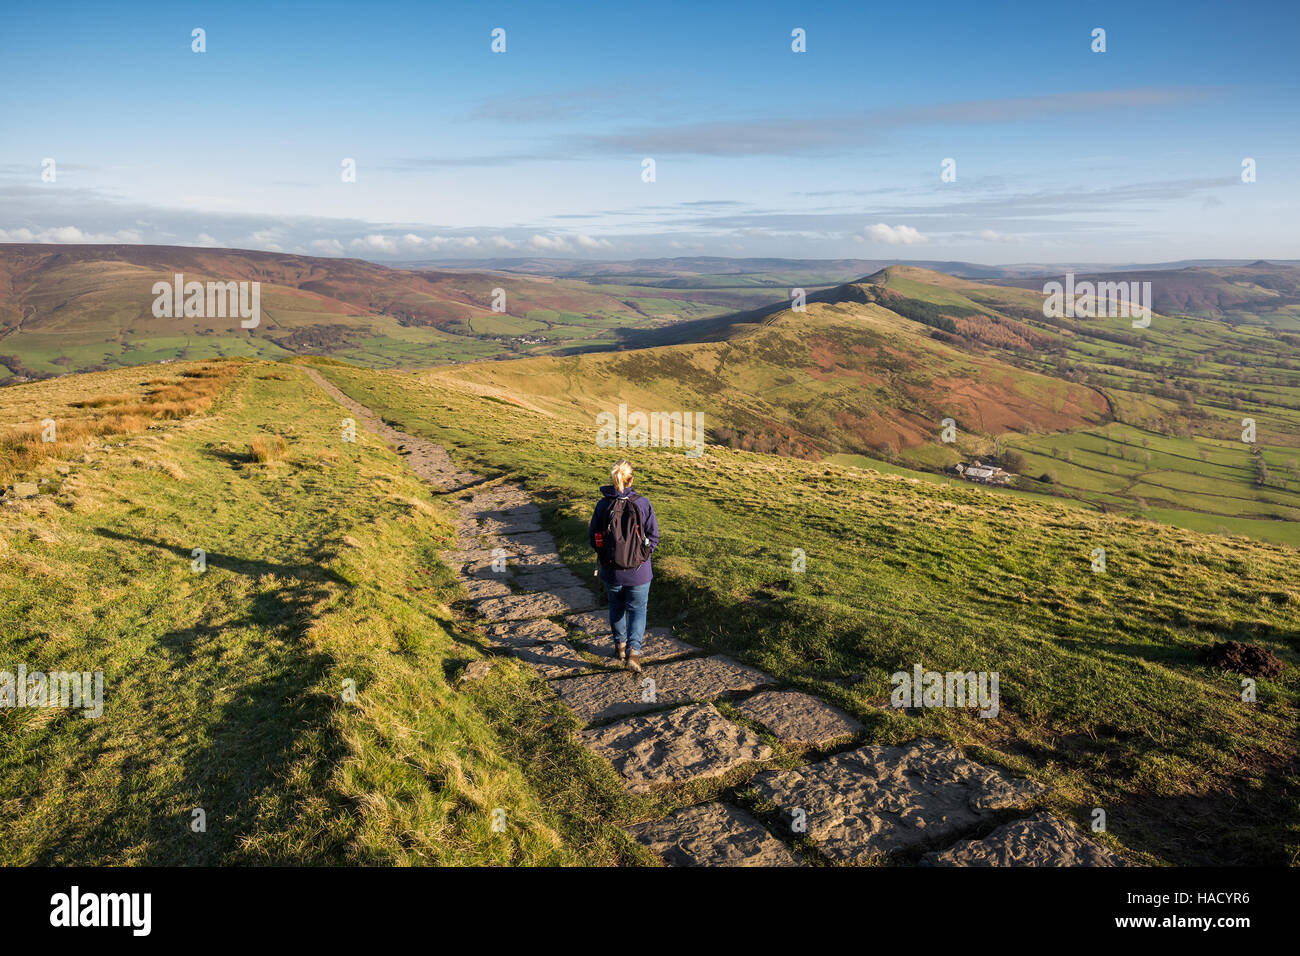 Woman walking the stone path from Mam Tor to Hollins Cross near Castleton in the Peak District, Derbyshire, UK. Stock Photo